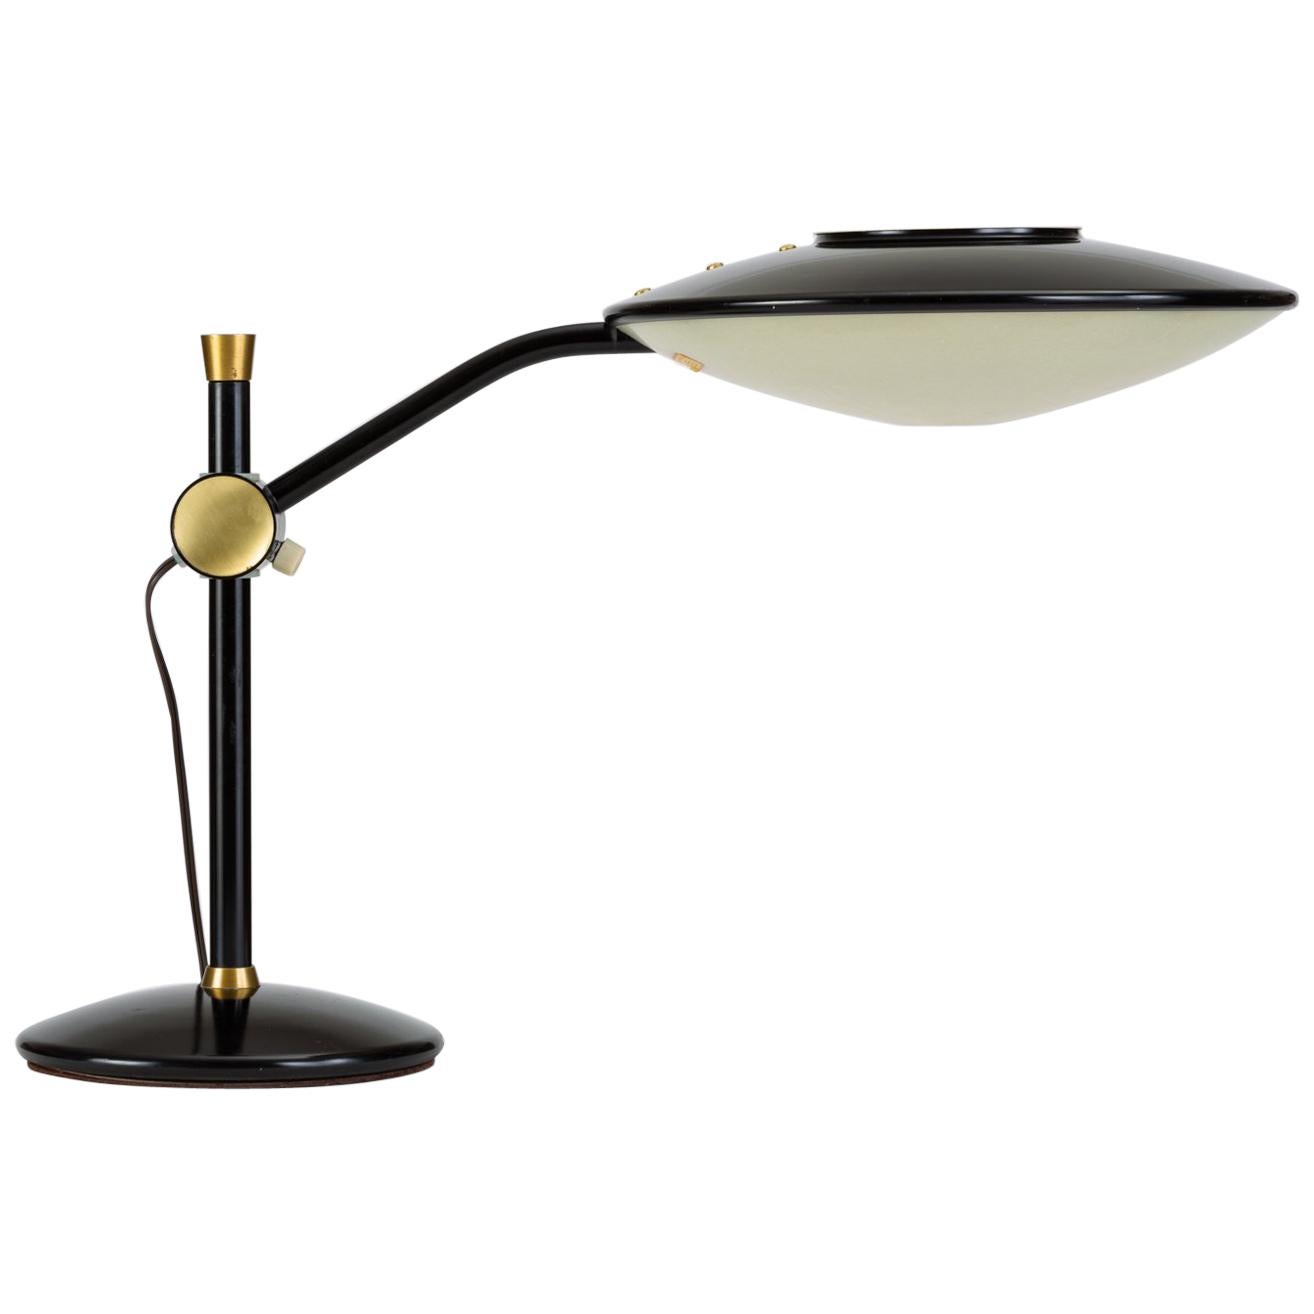 Black-Enameled Desk Lamp with Brass Accents by Dazor